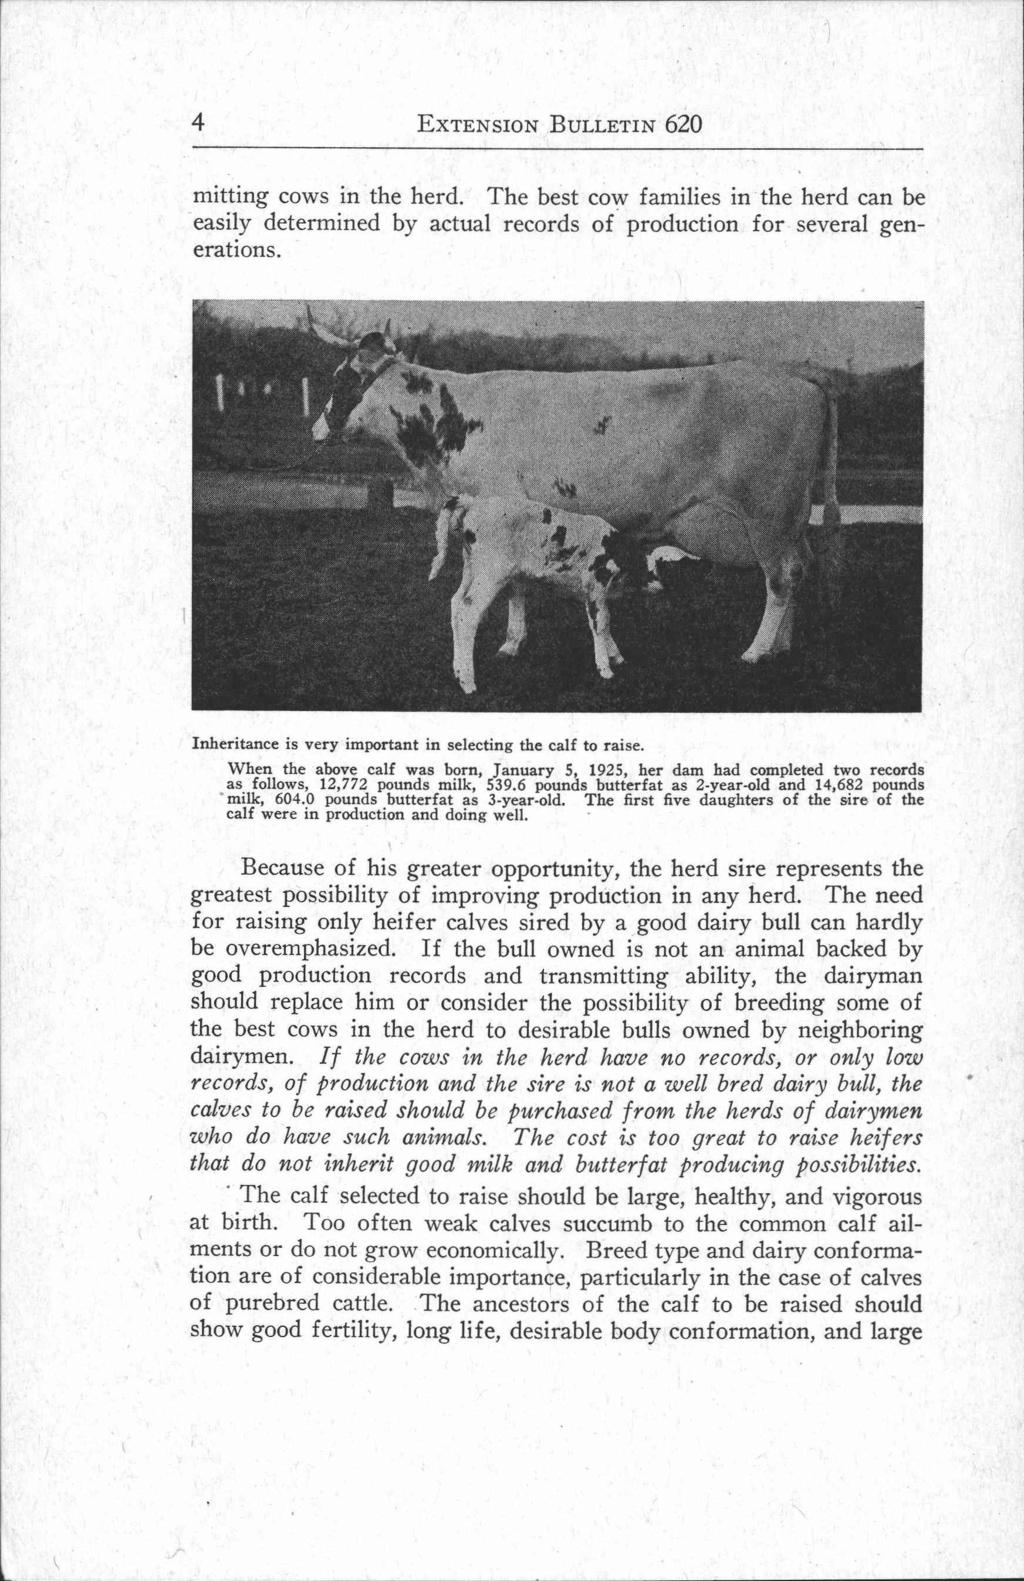 4 EXTENSION BULLETIN 620 mitting cows in the herd. The best cow families in the herd can be easily determined by actual records of production for several generations.